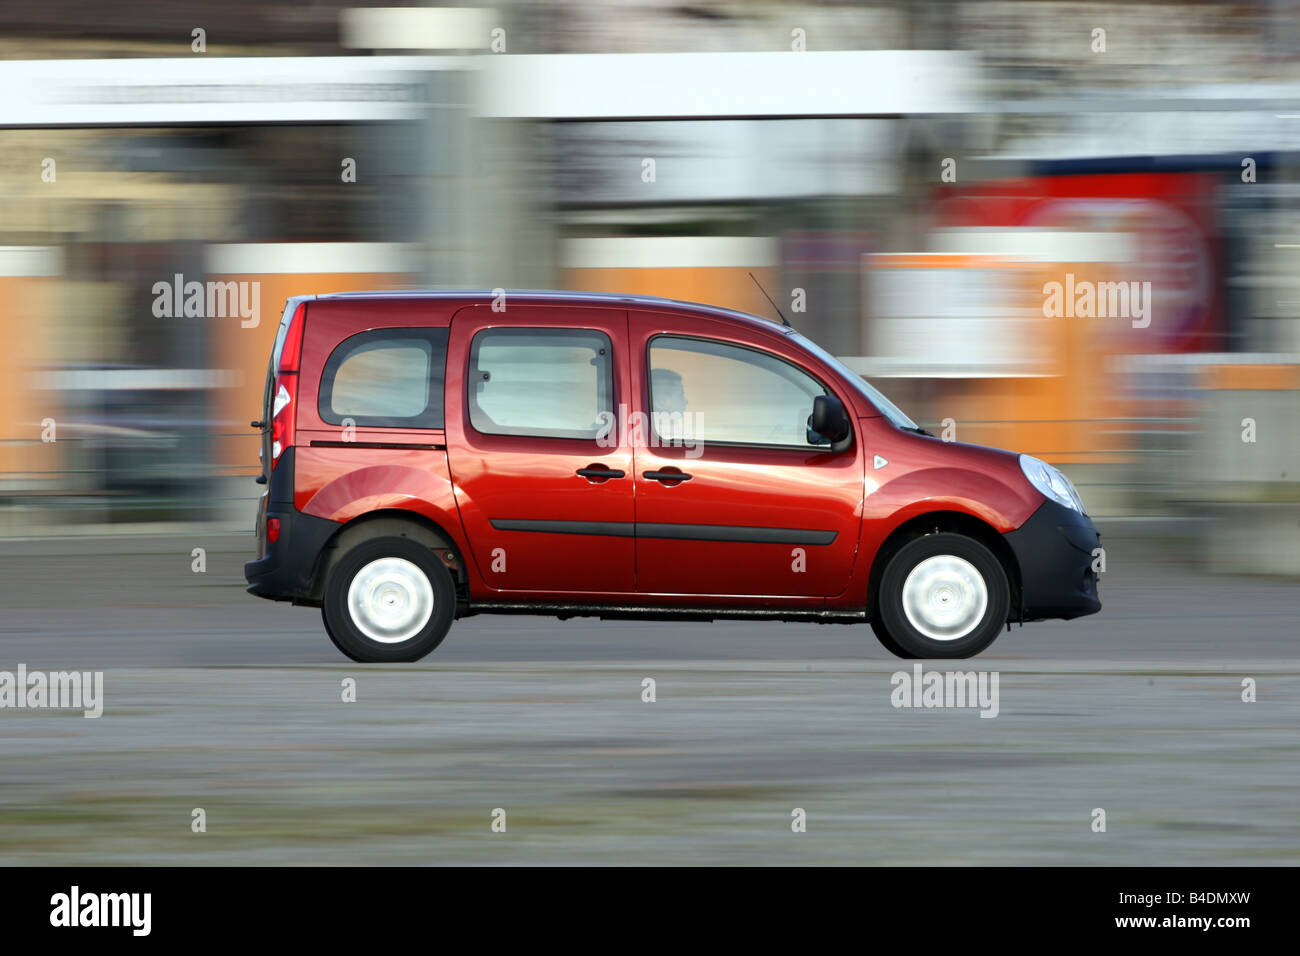 Renault Kangoo 1.6 16V, model year 2008-, ruby colored, driving, side view, City Stock Photo